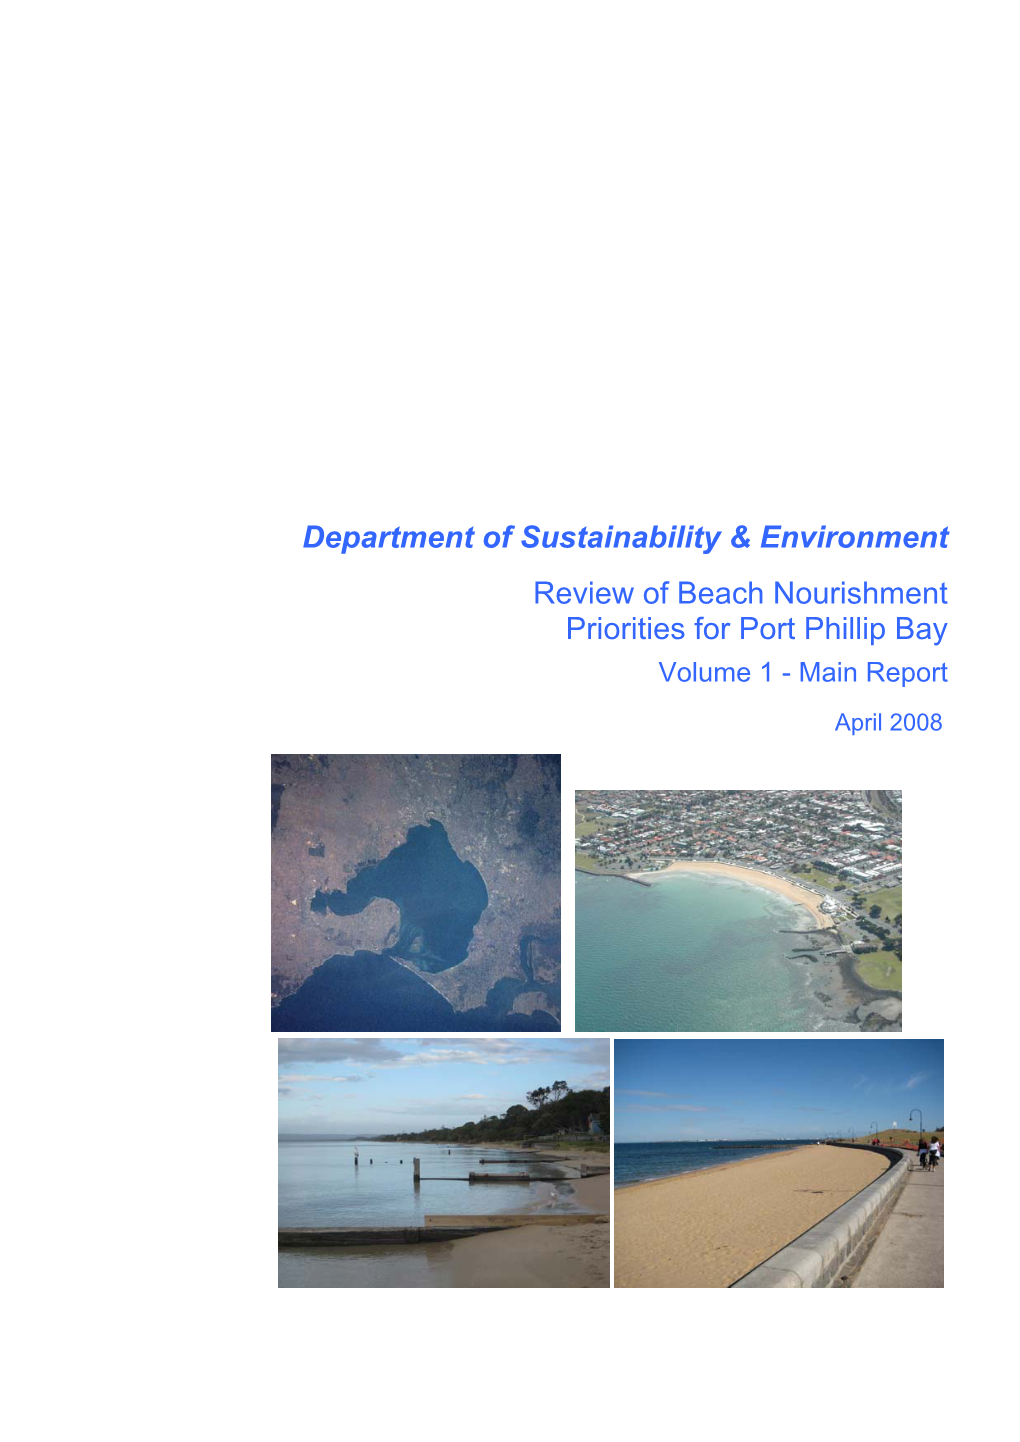 Department of Sustainability & Environment Review of Beach